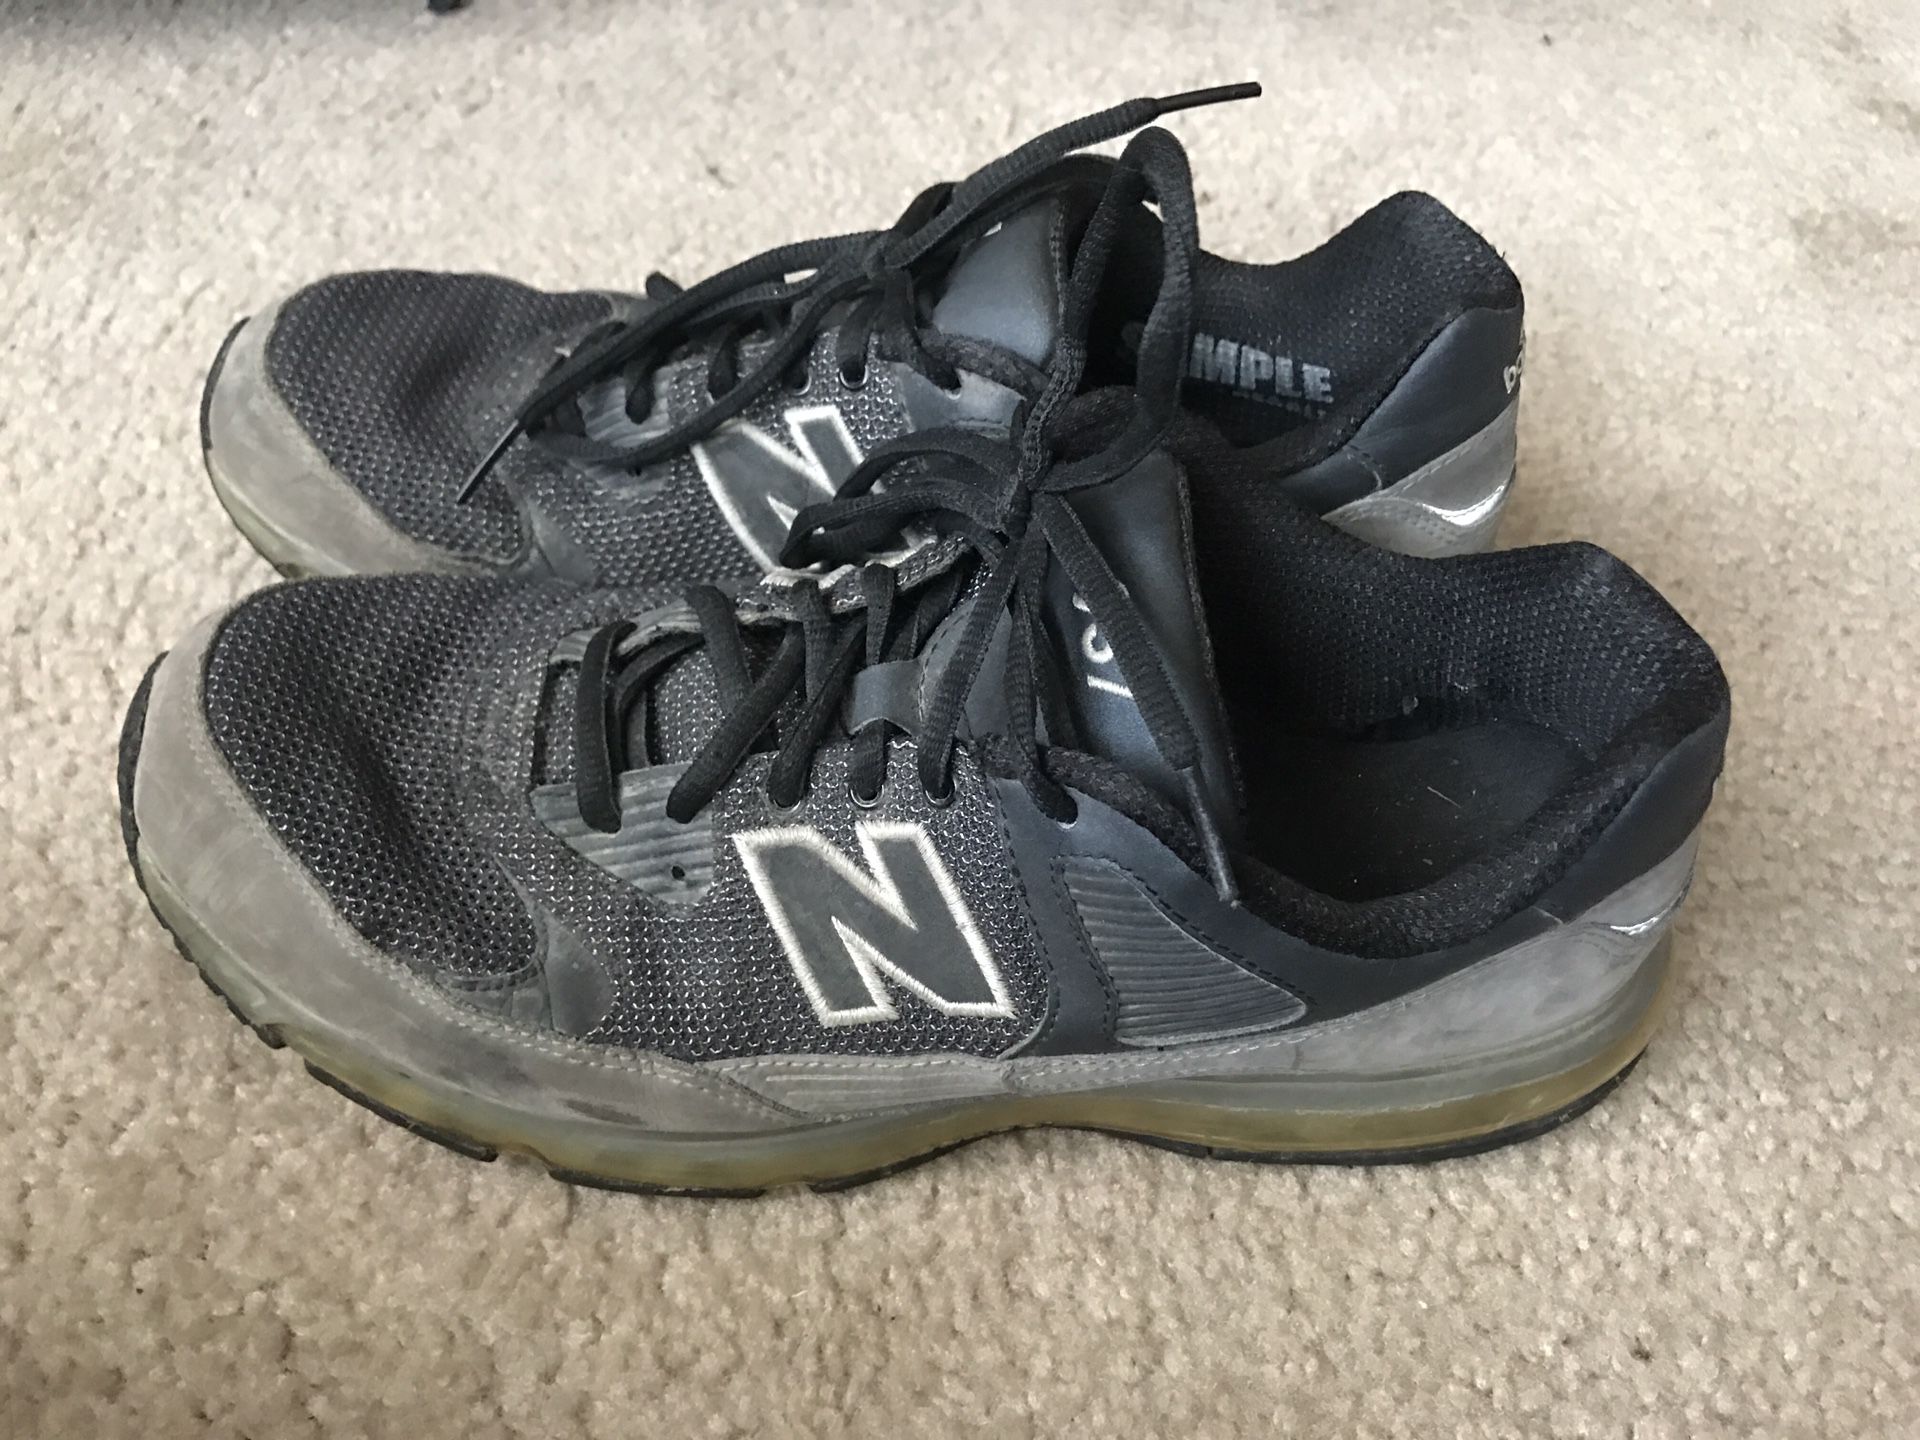 Oriental agencia Polinizar New Balance 937 Sample men's 9.5 for Sale in Lowell, MA - OfferUp